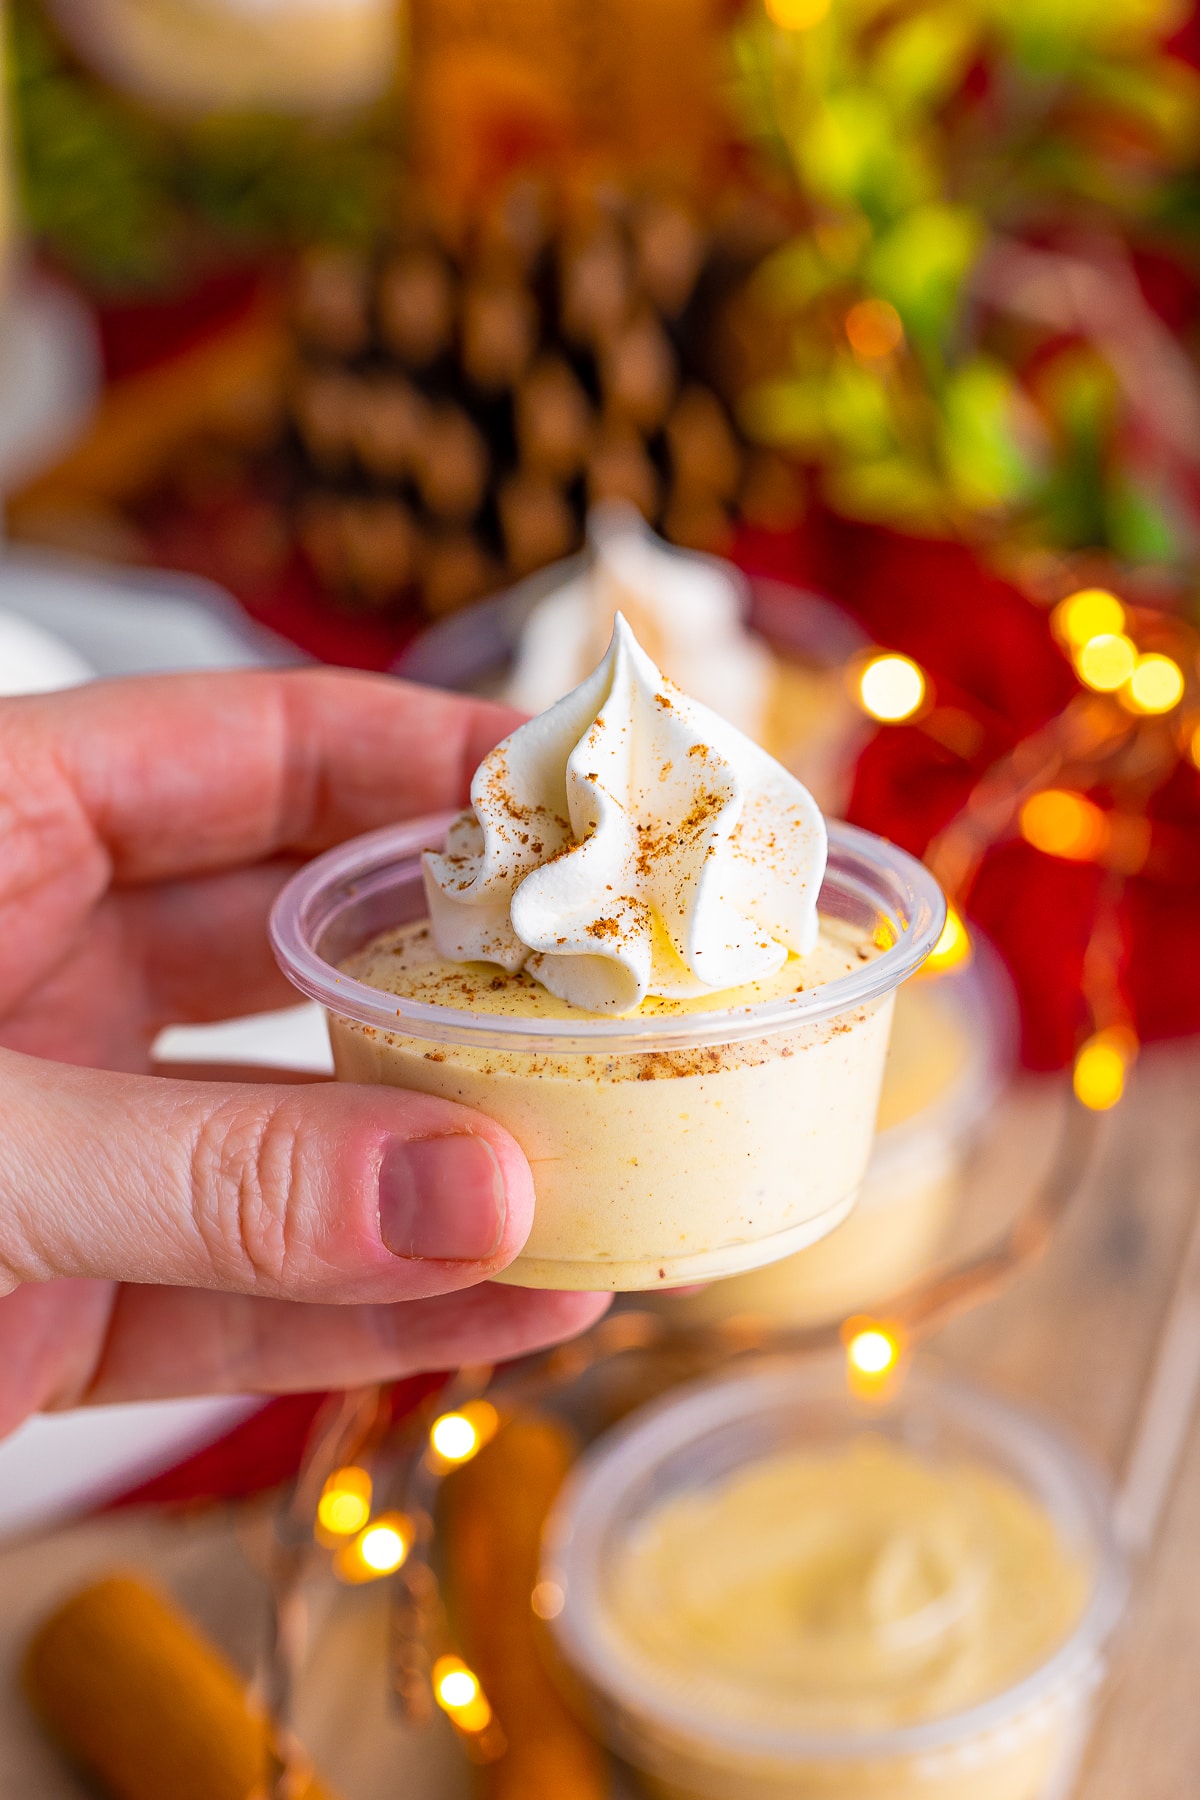 Hand holding up one of the Eggnog Pudding Shots.